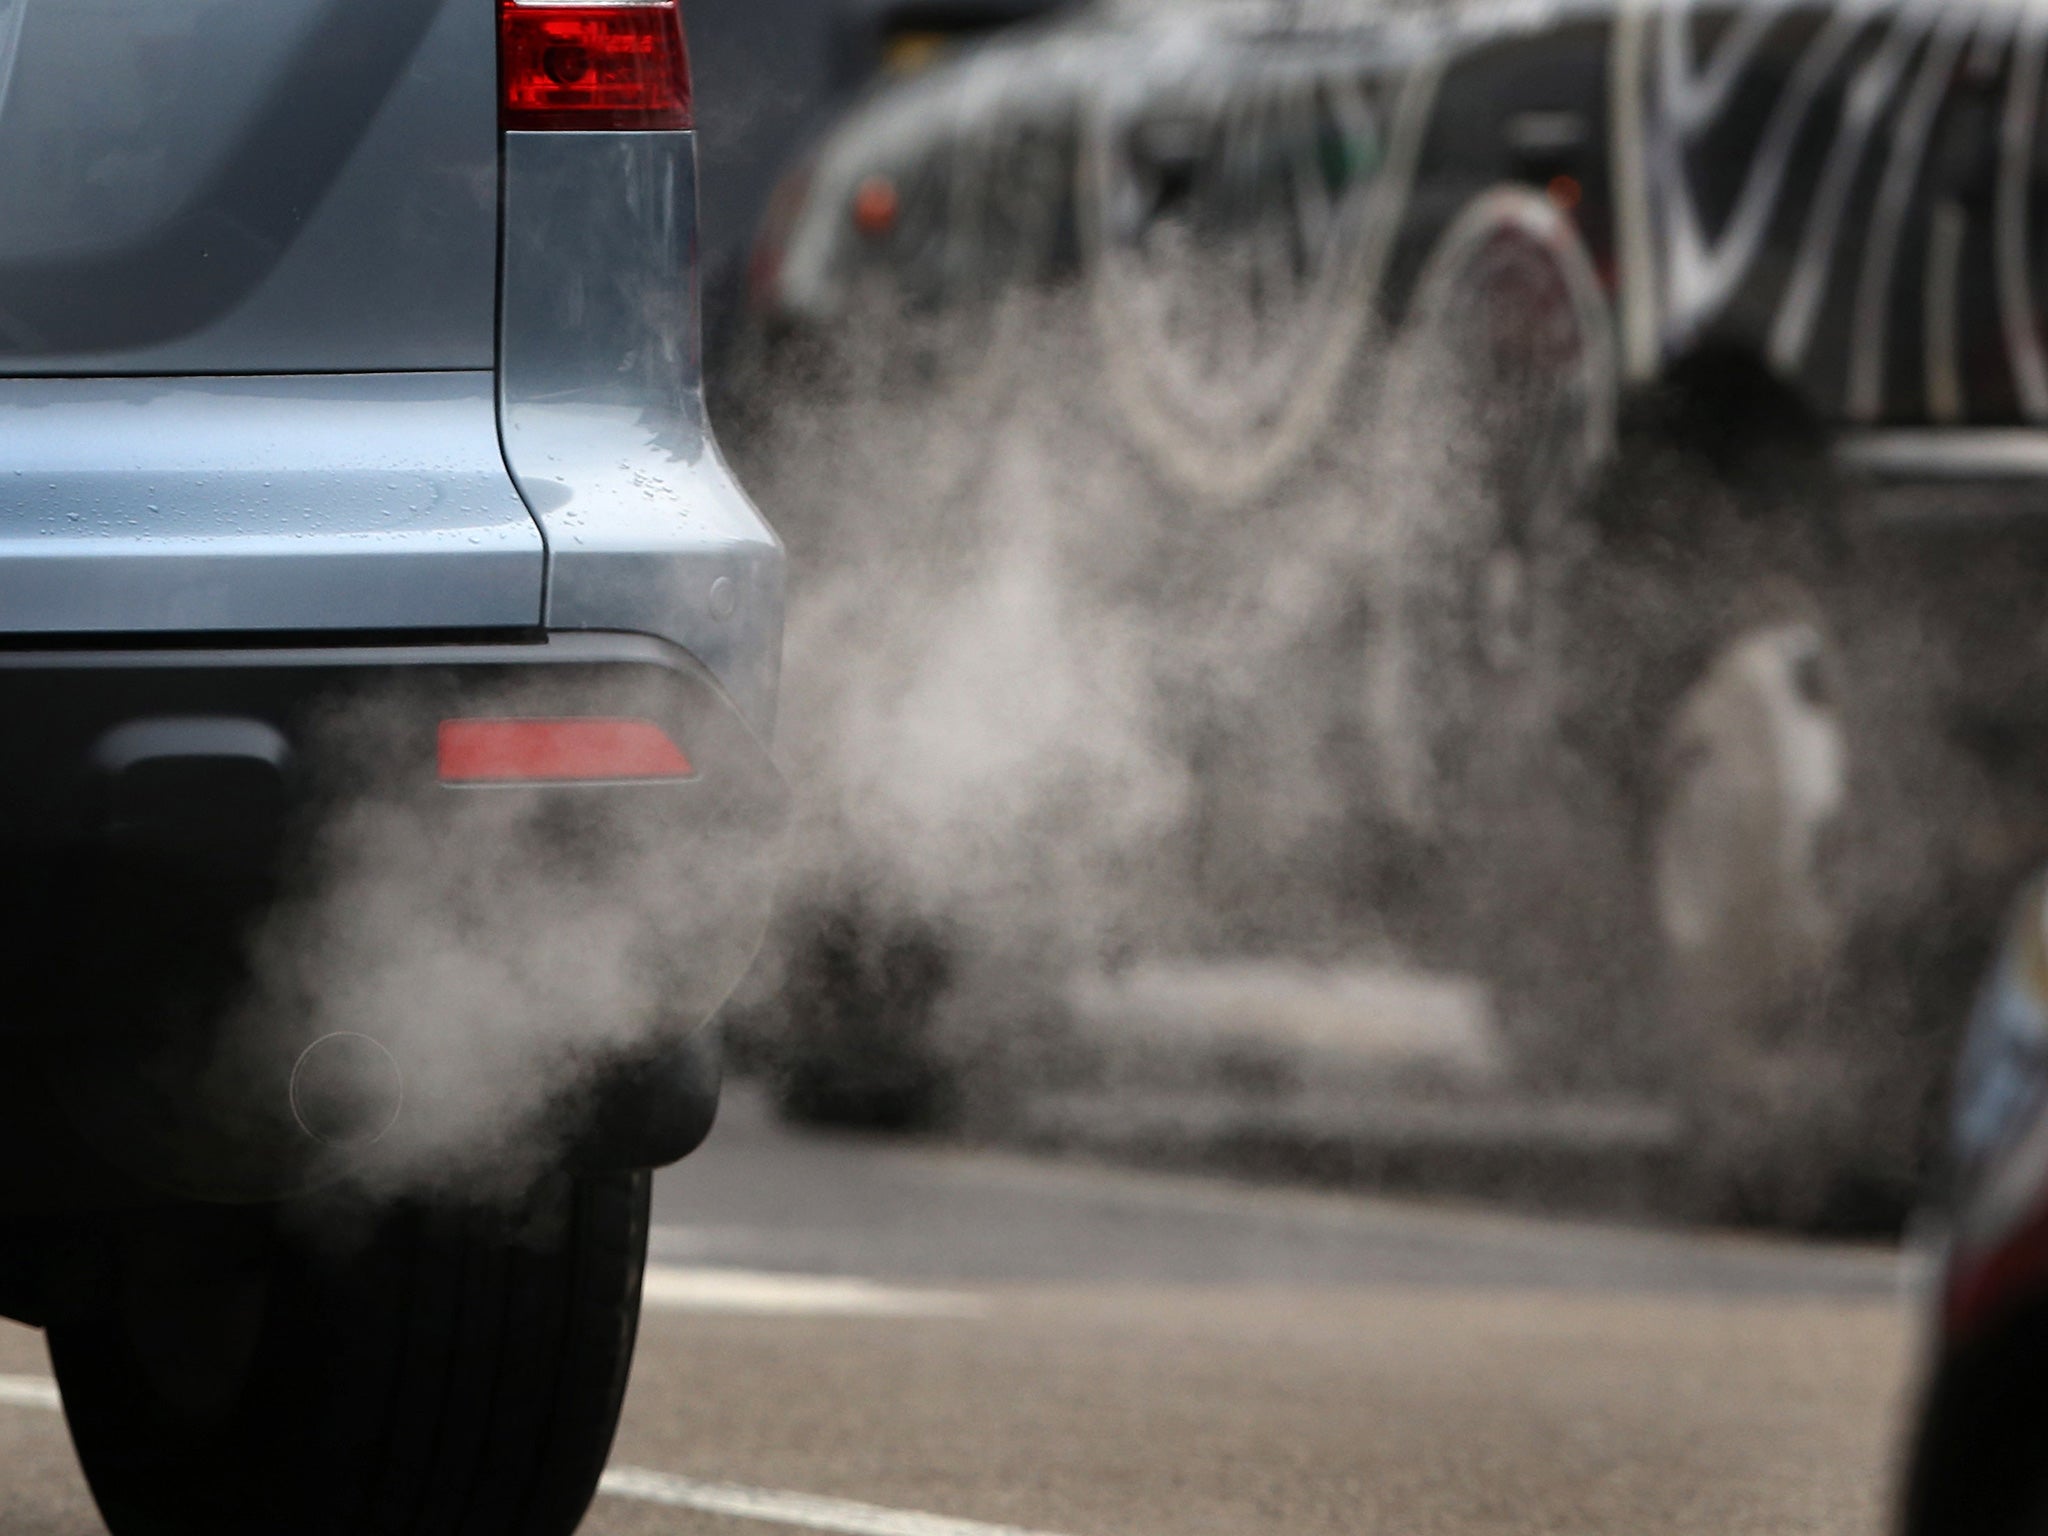 Cars are responsible for around 12% of emissions across the EU